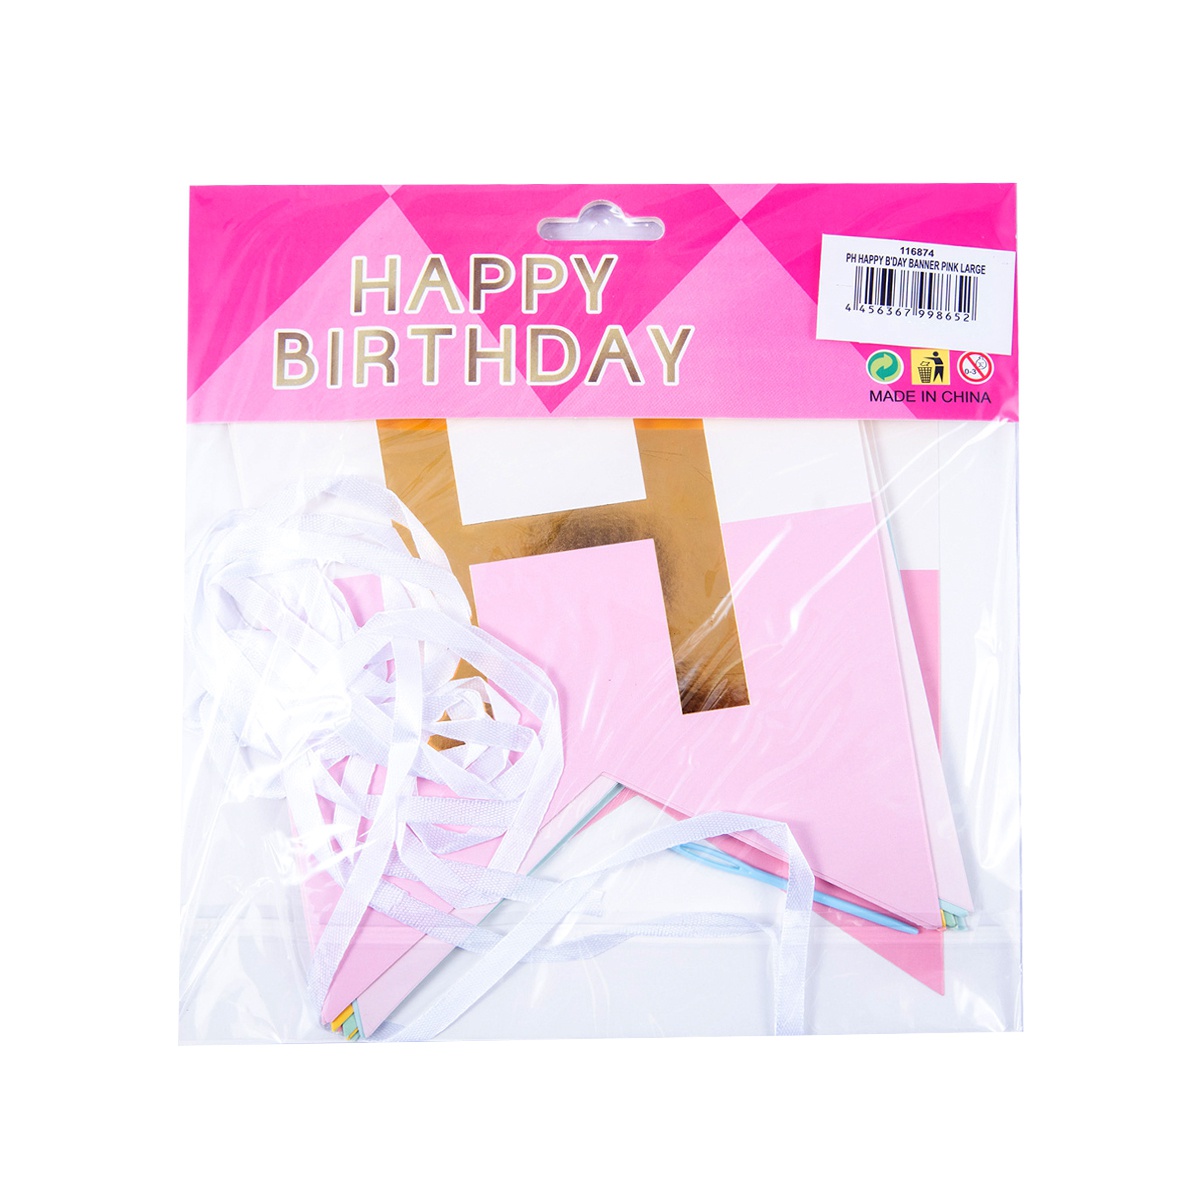 Party Hat Happy Birth Day Pink Banner Large - PARTY HAT - Party-Ware - in Sri Lanka